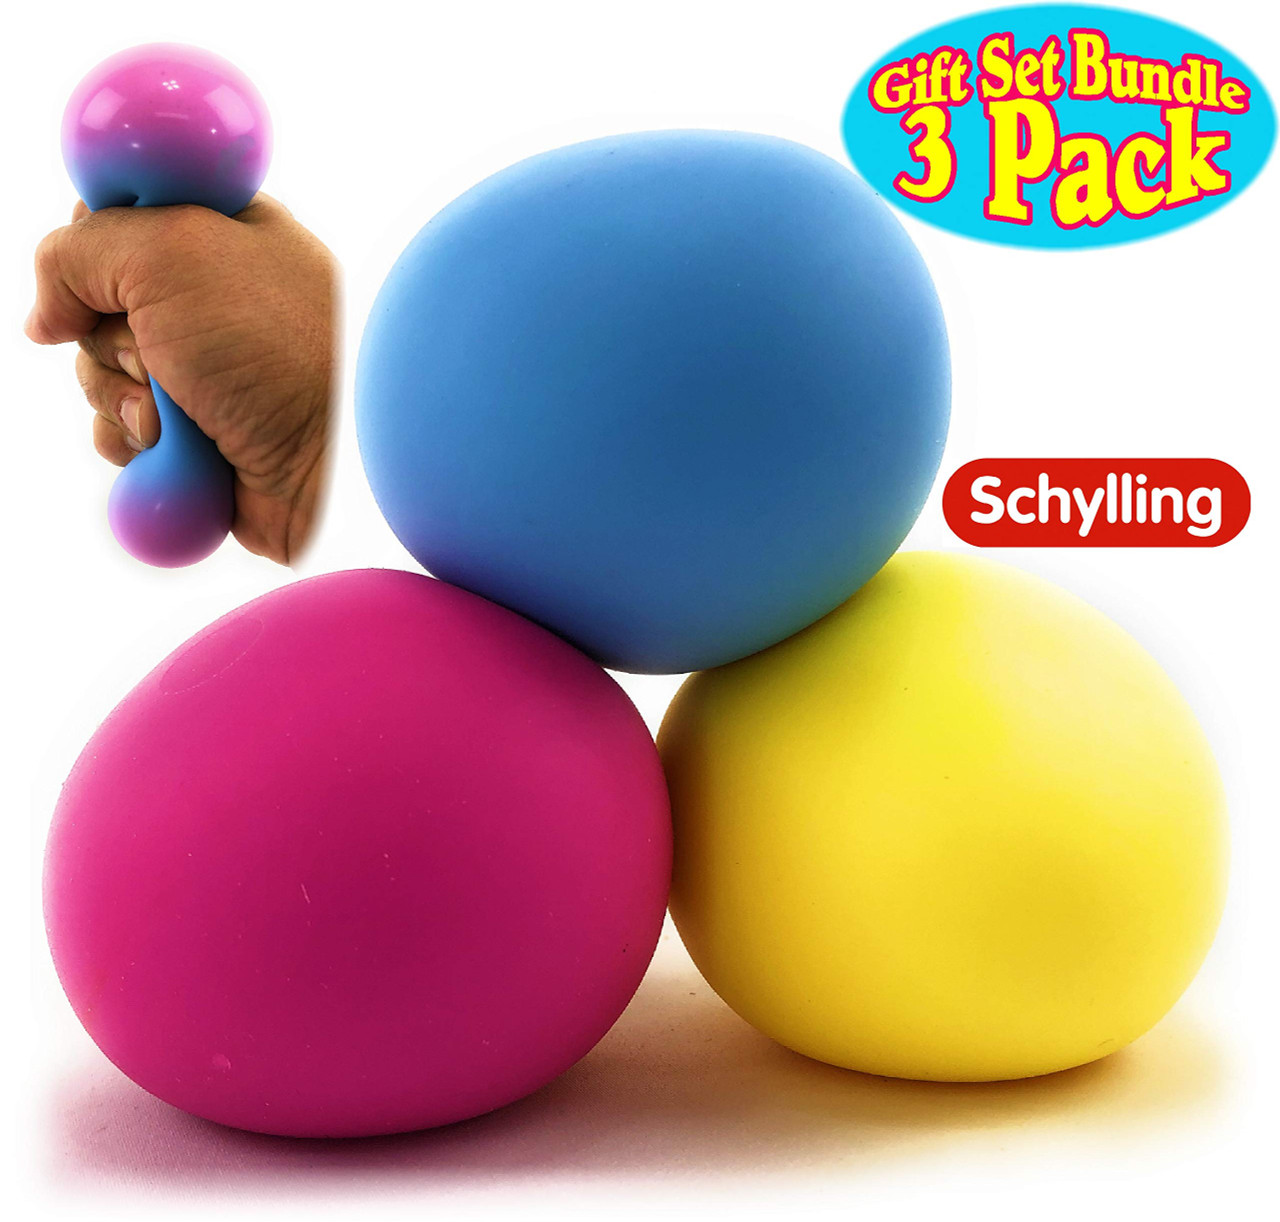 Nee-Doh Schylling Crystal Squeeze Groovy Glob! Squishy, Squeezy, Stretchy  Stress Balls Blue, Pink & Purple Complete Gift Set Party Bundle - 3 Pack